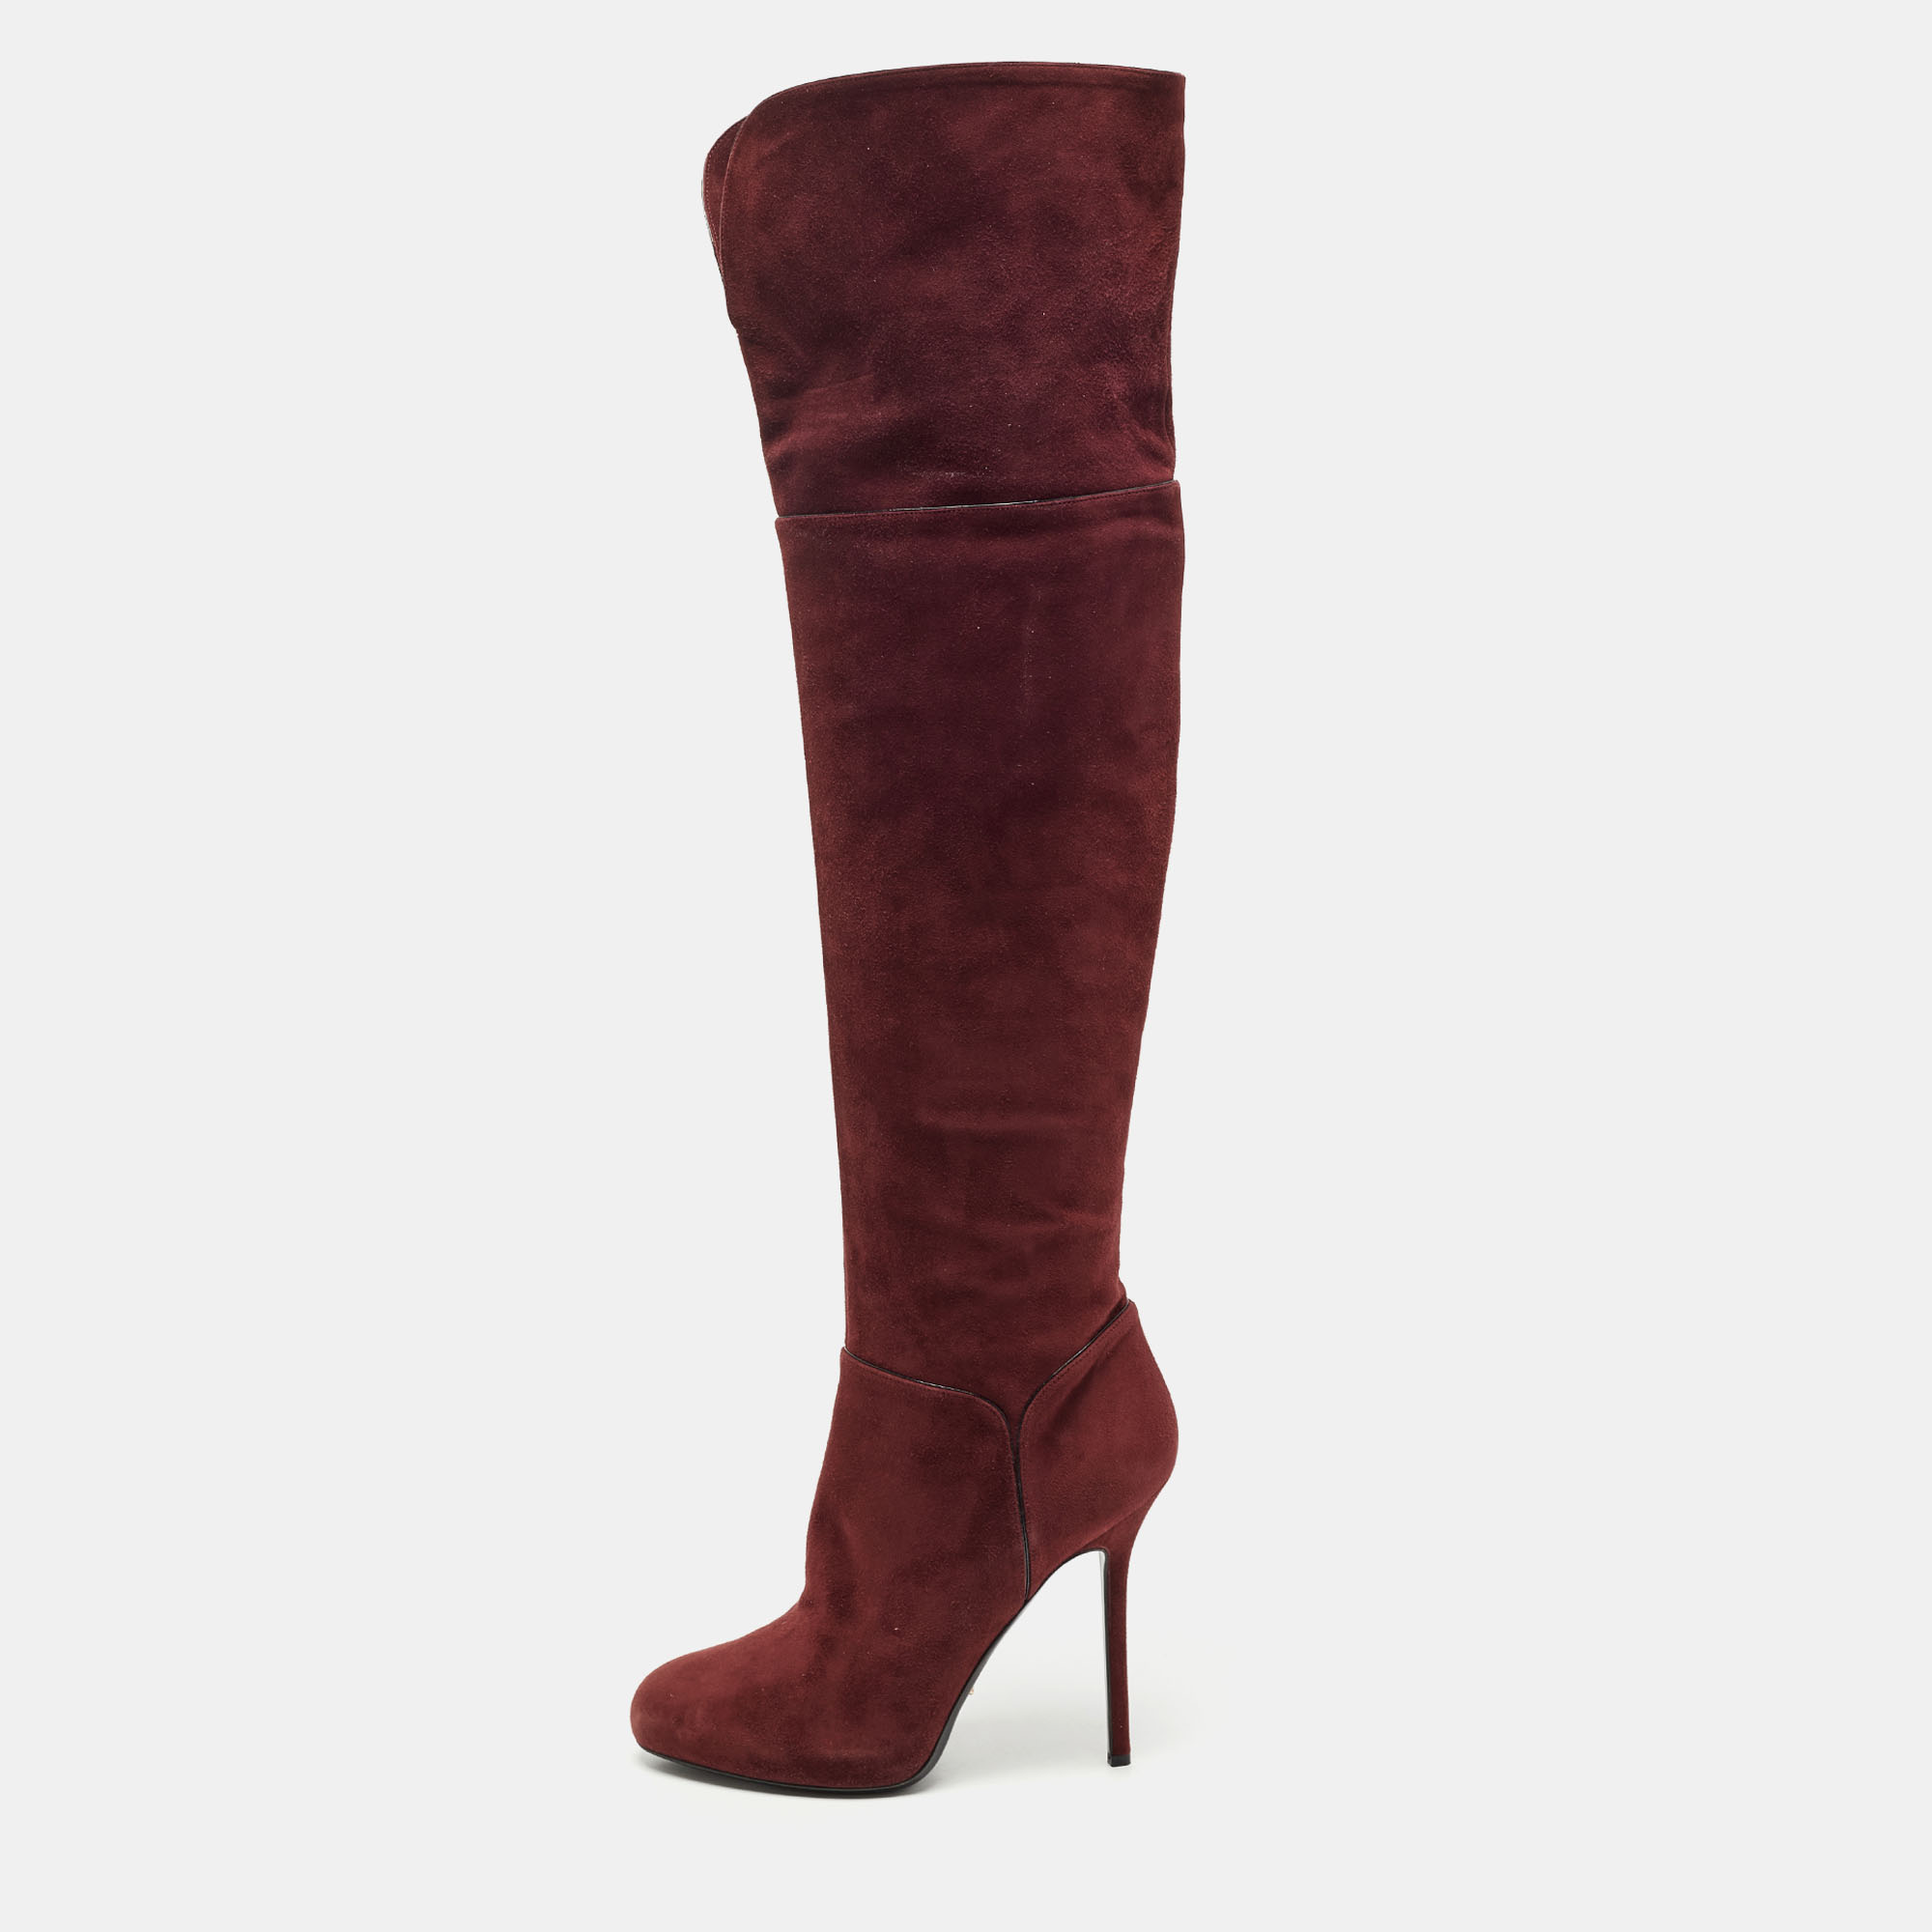 Pre-owned Sergio Rossi Burgundy Suede Zip Detail Knee Length Platform Boots Size 40.5